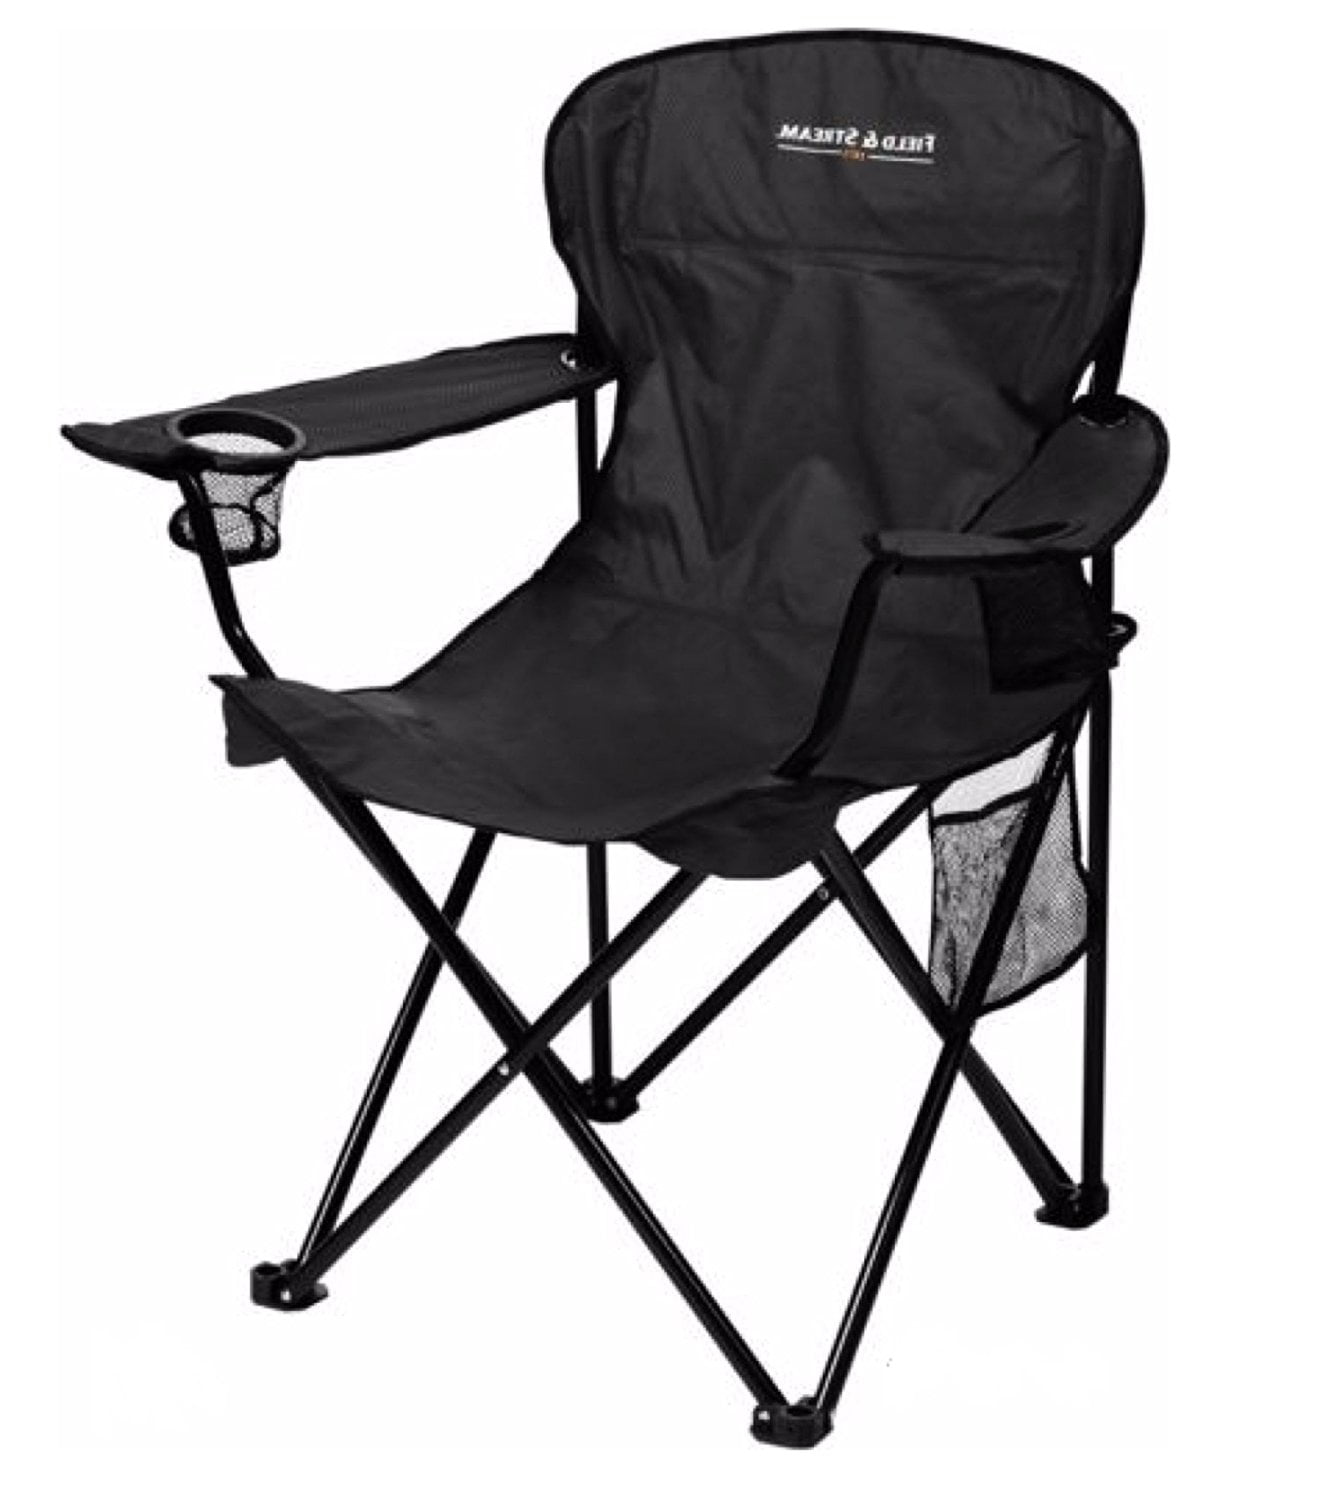 field and stream ultimate fishing chair